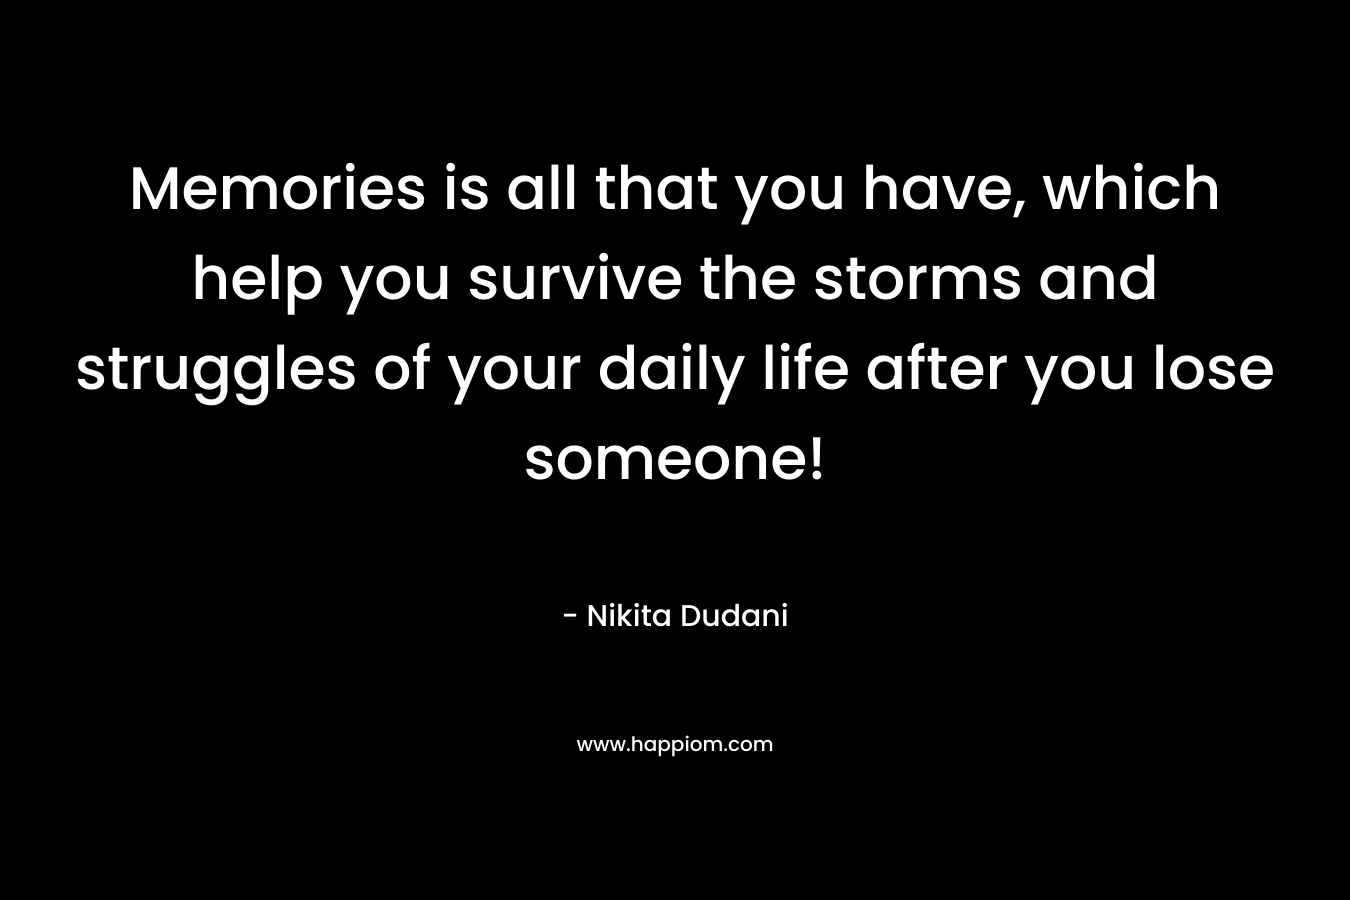 Memories is all that you have, which help you survive the storms and struggles of your daily life after you lose someone!